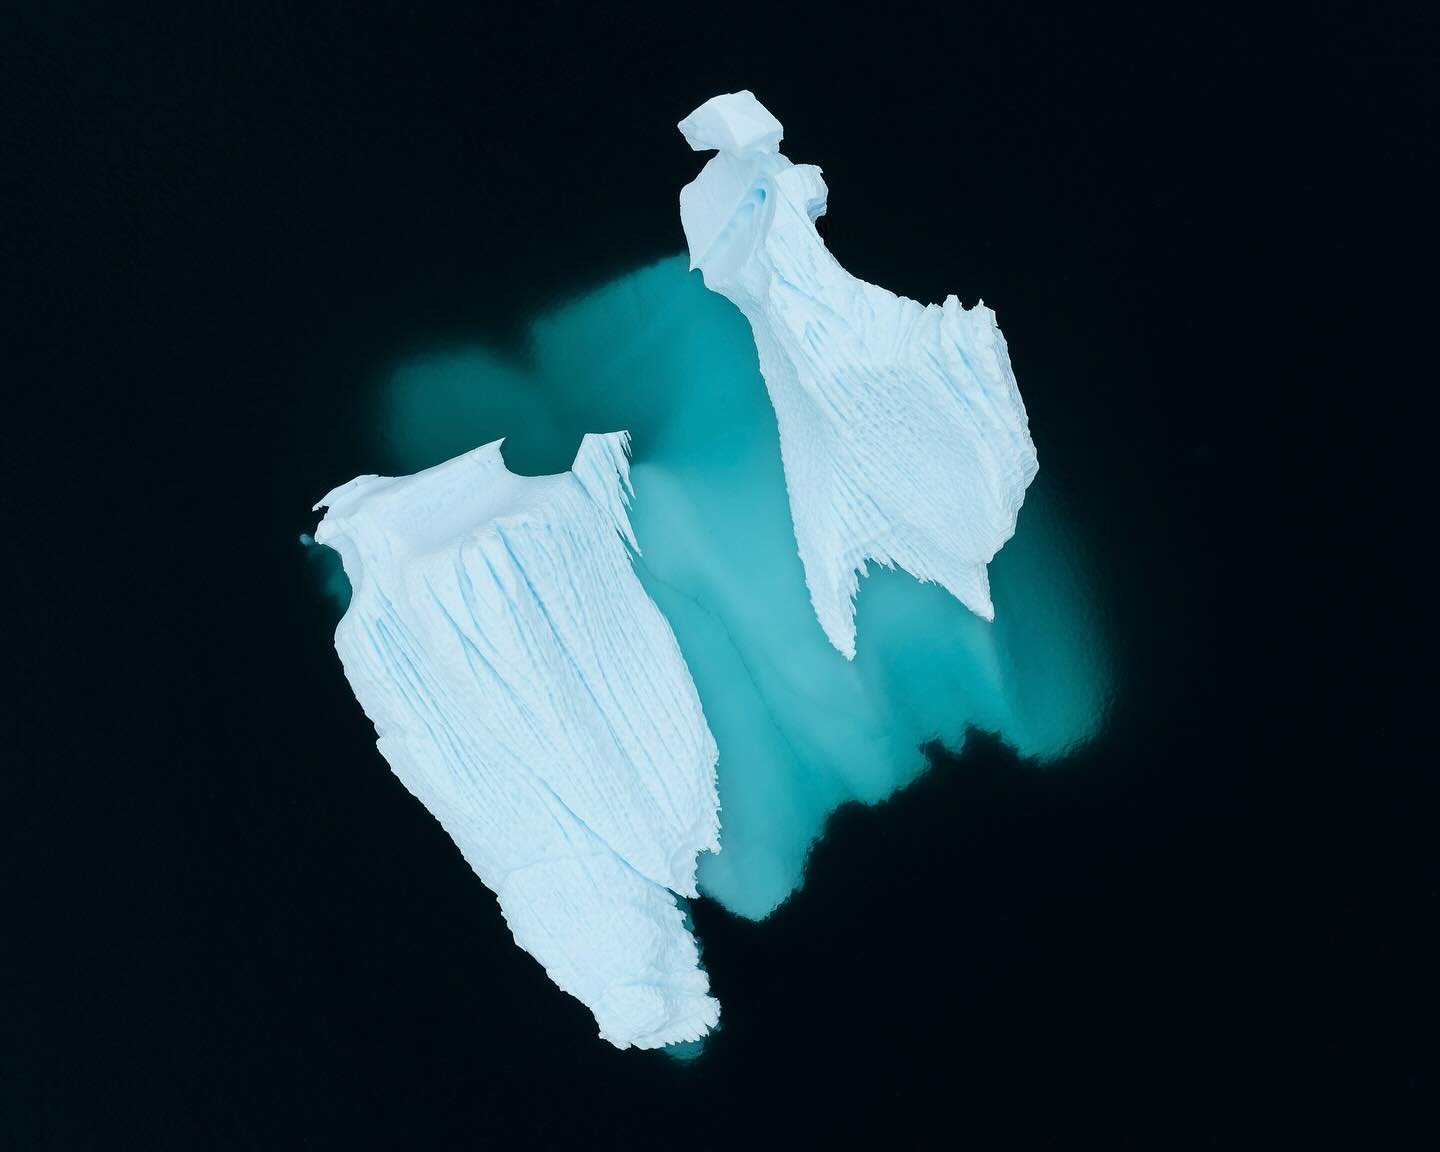 Iceberg yin and yang. #ice #icebergs #antarctica #dji #dronephotography #dronestagram #iaato #polartourismguides #expeditionship #expeditionphotography